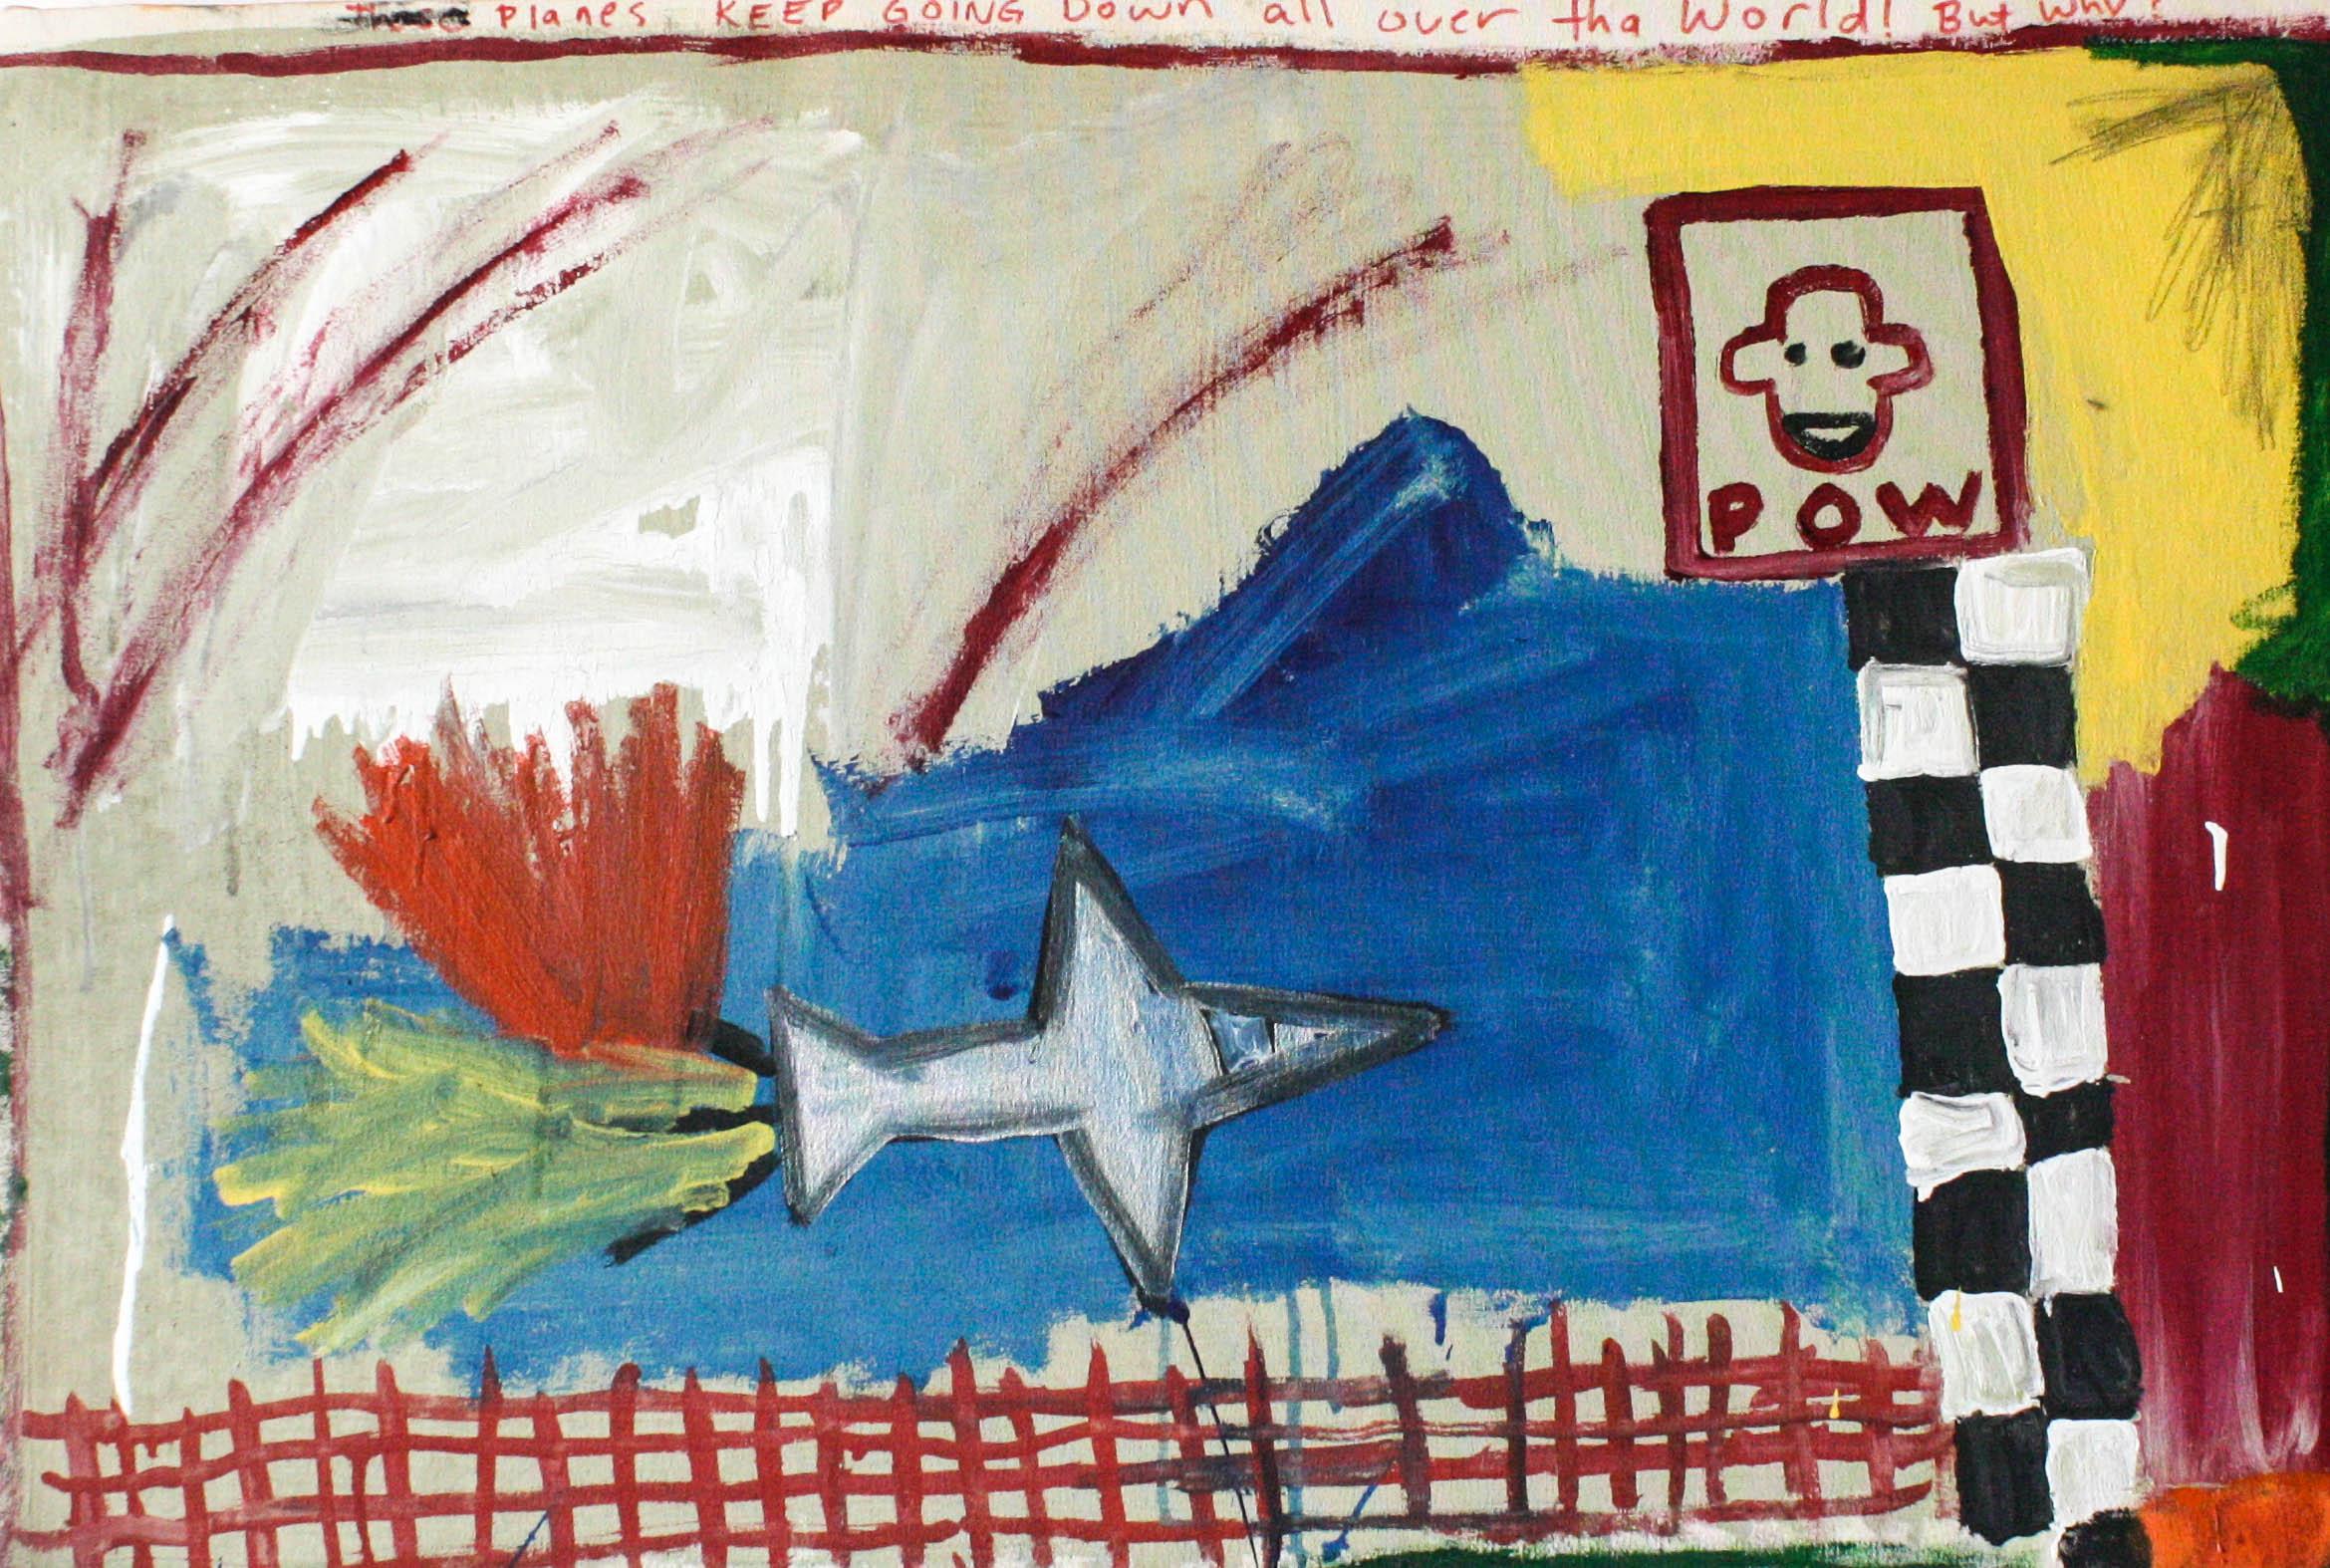 Planes Keep Going Down- Canvas, Latex, Spray Paint, Oil, Pattern, Primary Colors - Painting by Marlos E’van